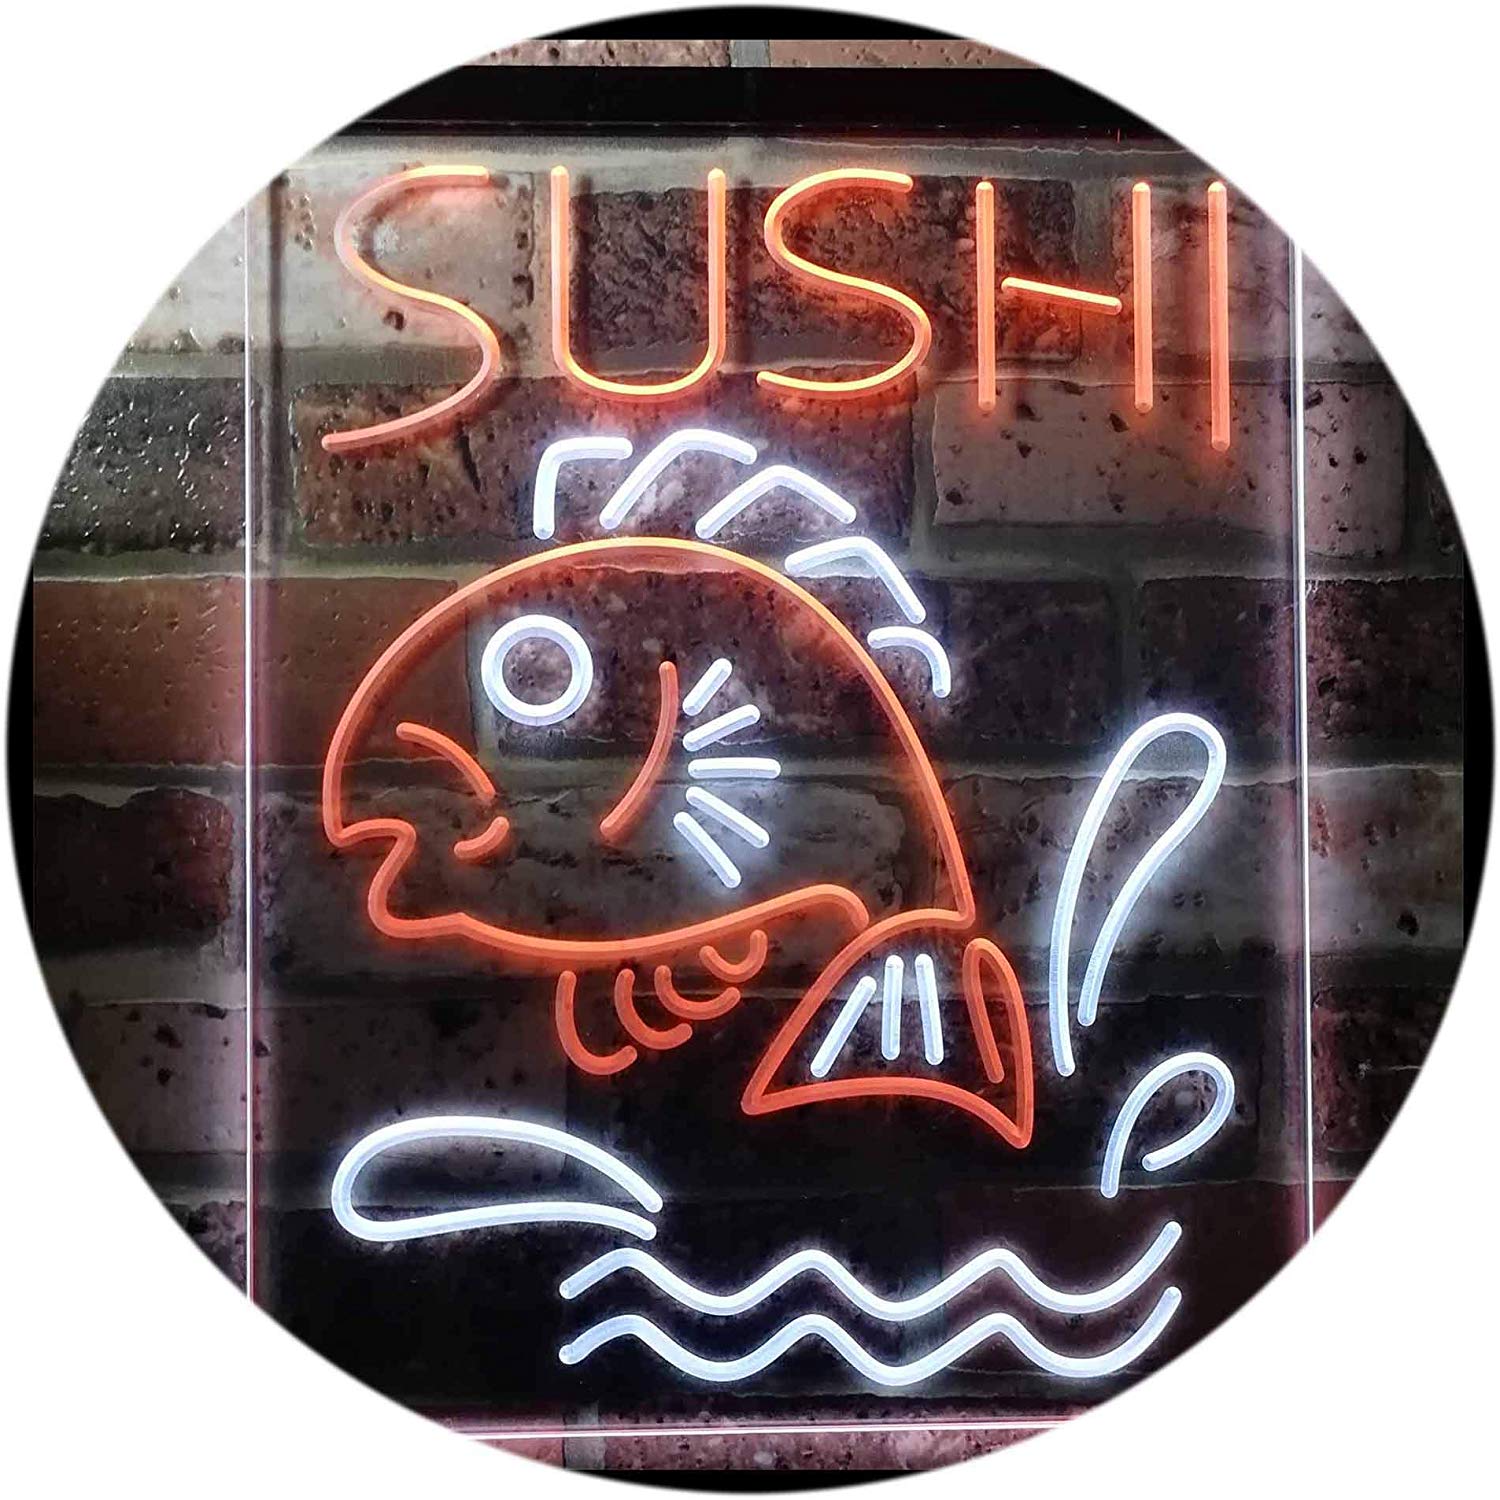 Fish Sushi LED Neon Light Sign - Way Up Gifts